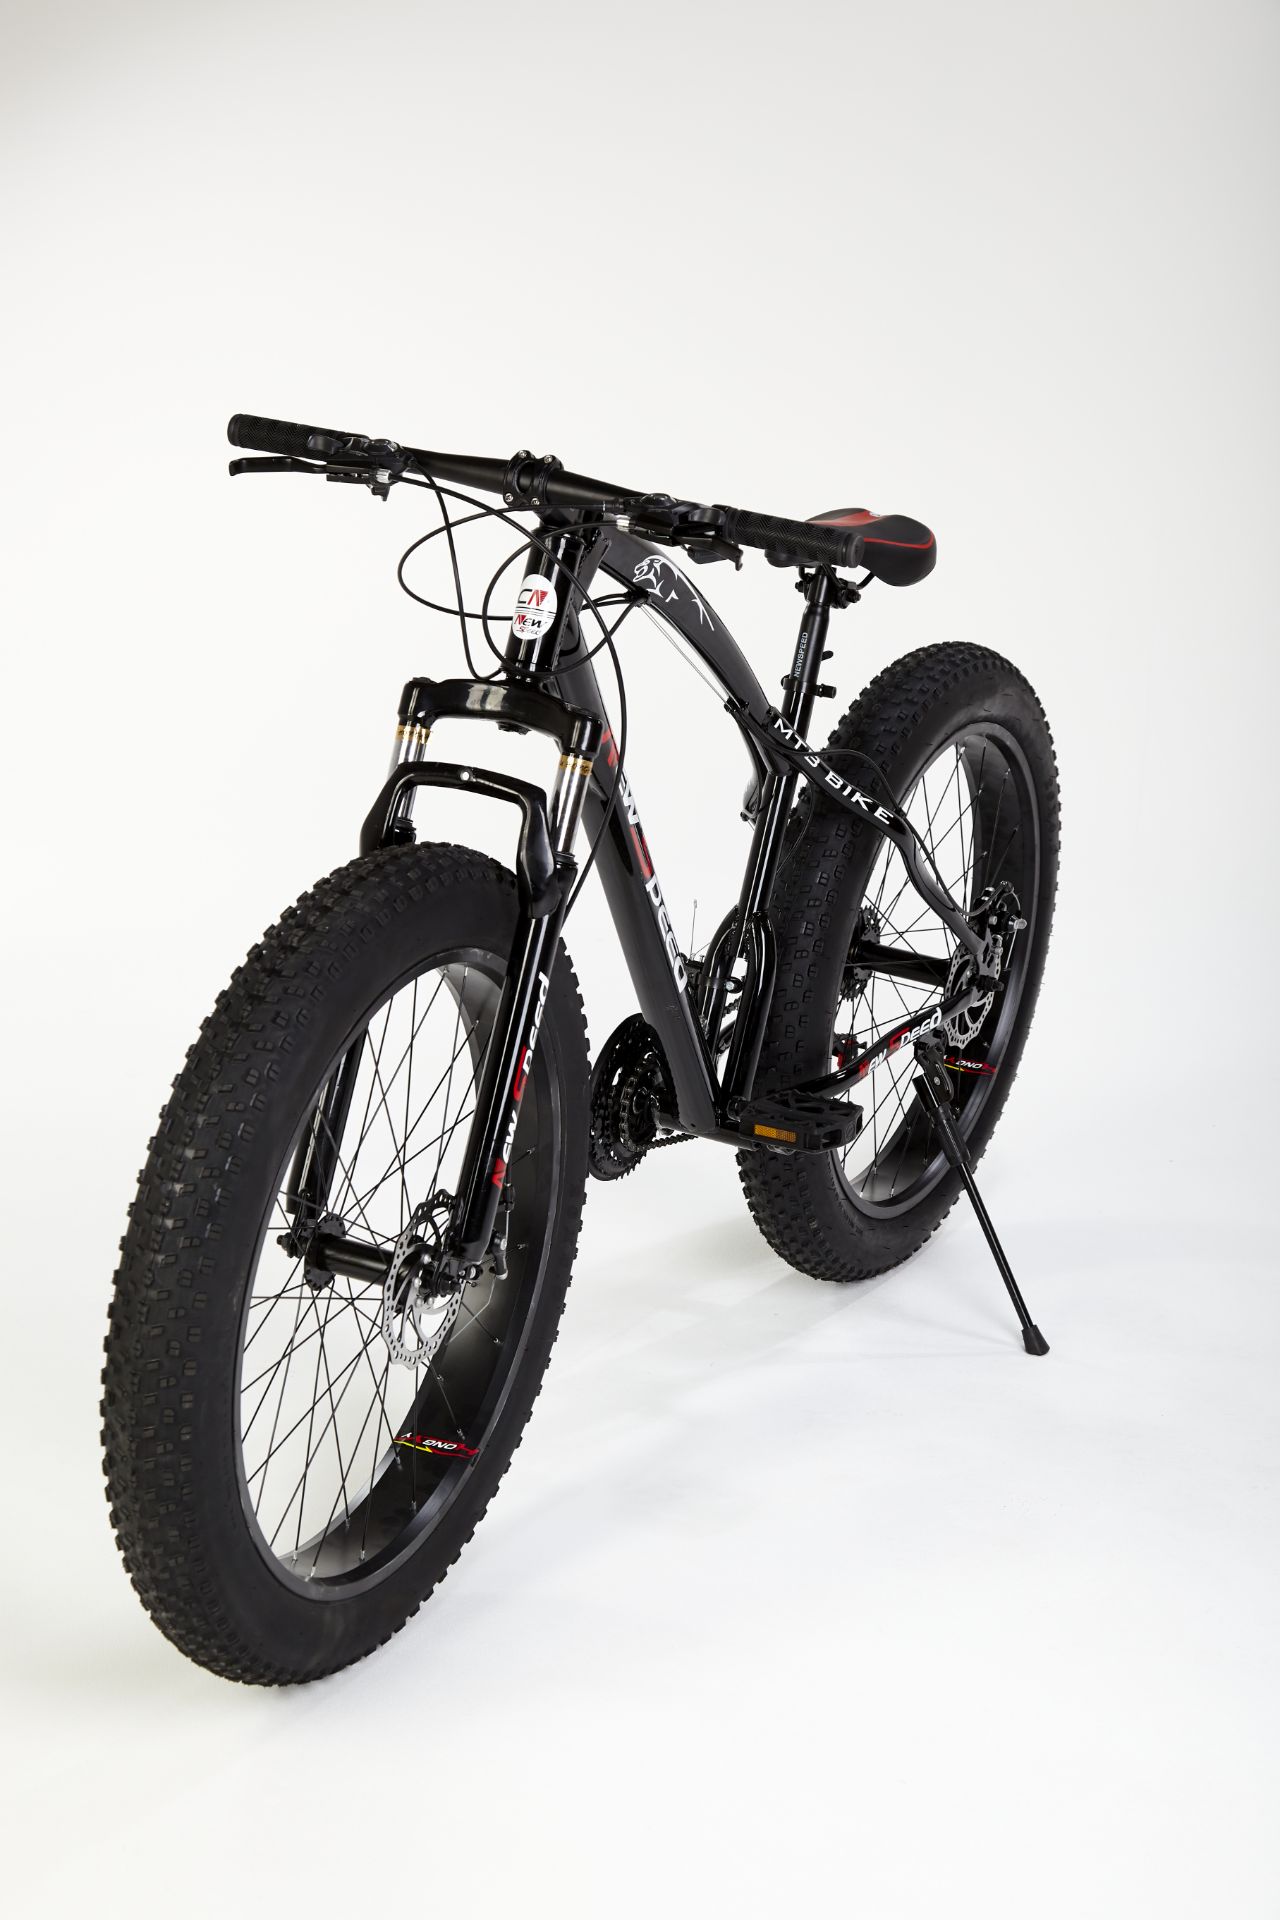 MOUNTAIN BIKE BICYCLE MEN/WOMEN FAT TIRE 26" WITH FRONT SUSPENSION - BLACK (04) - Image 11 of 12